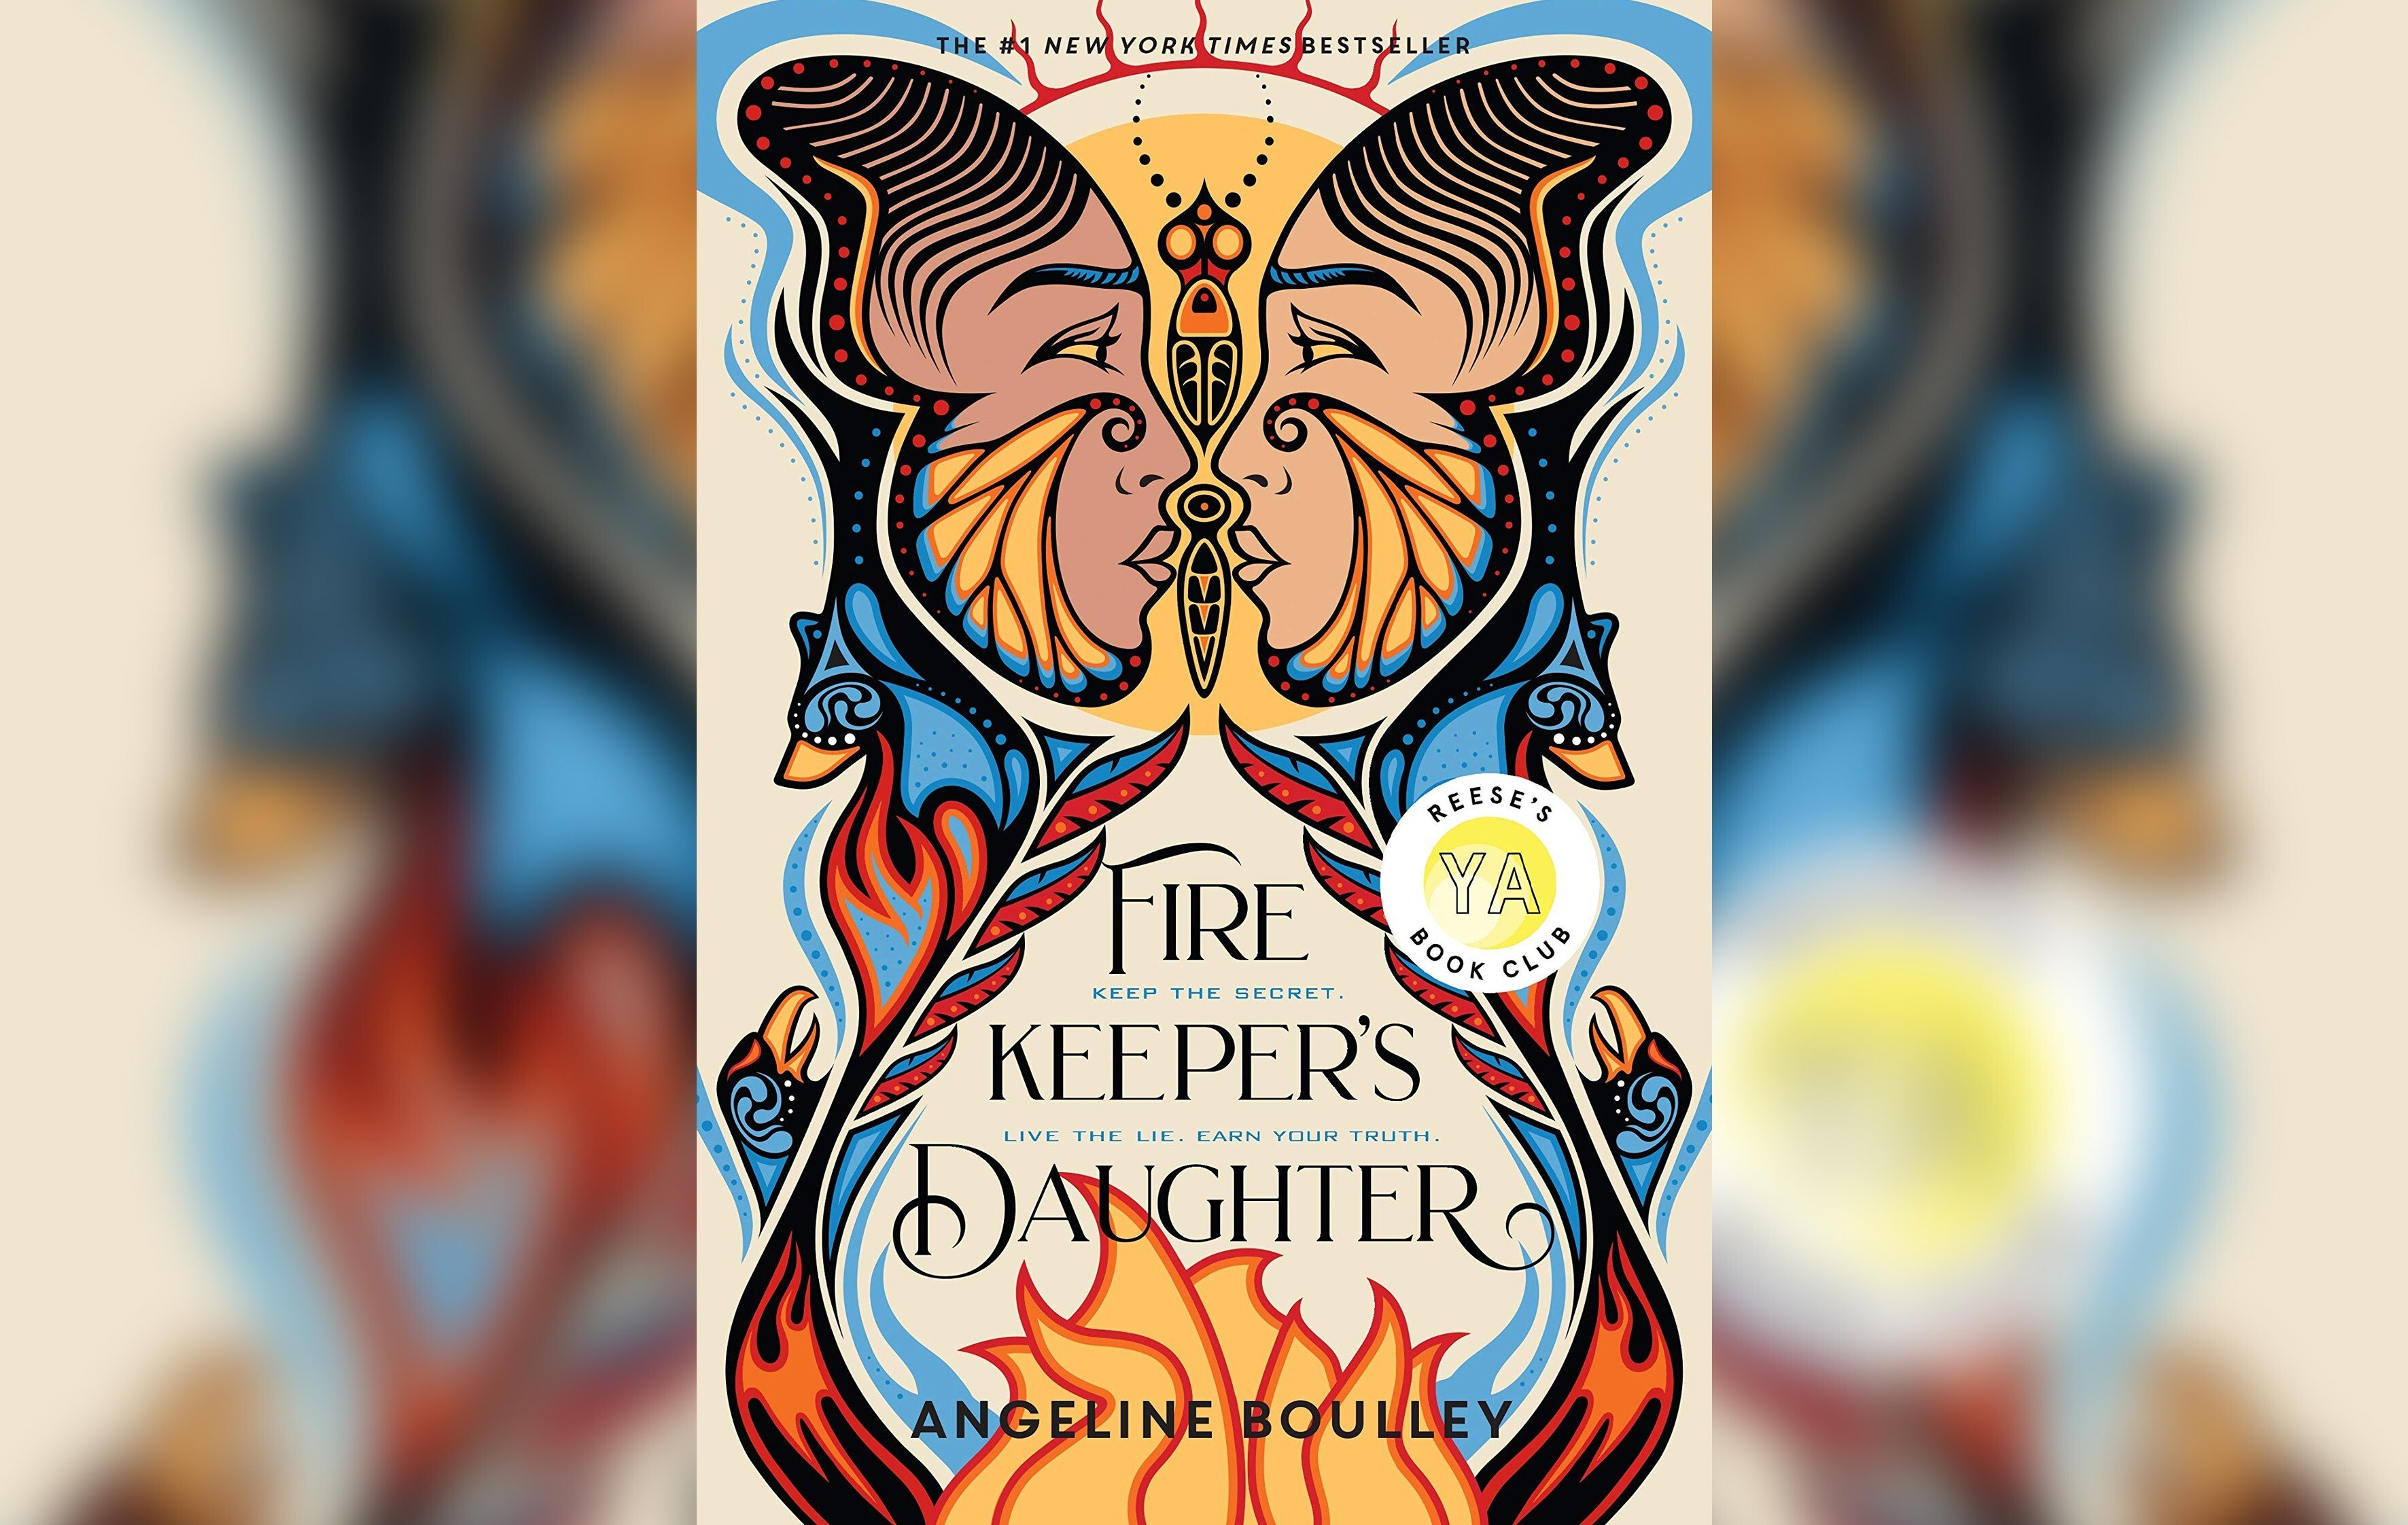 'The Firekeeper's Daughter' is a fascinating, contemporary tale about Native American life.